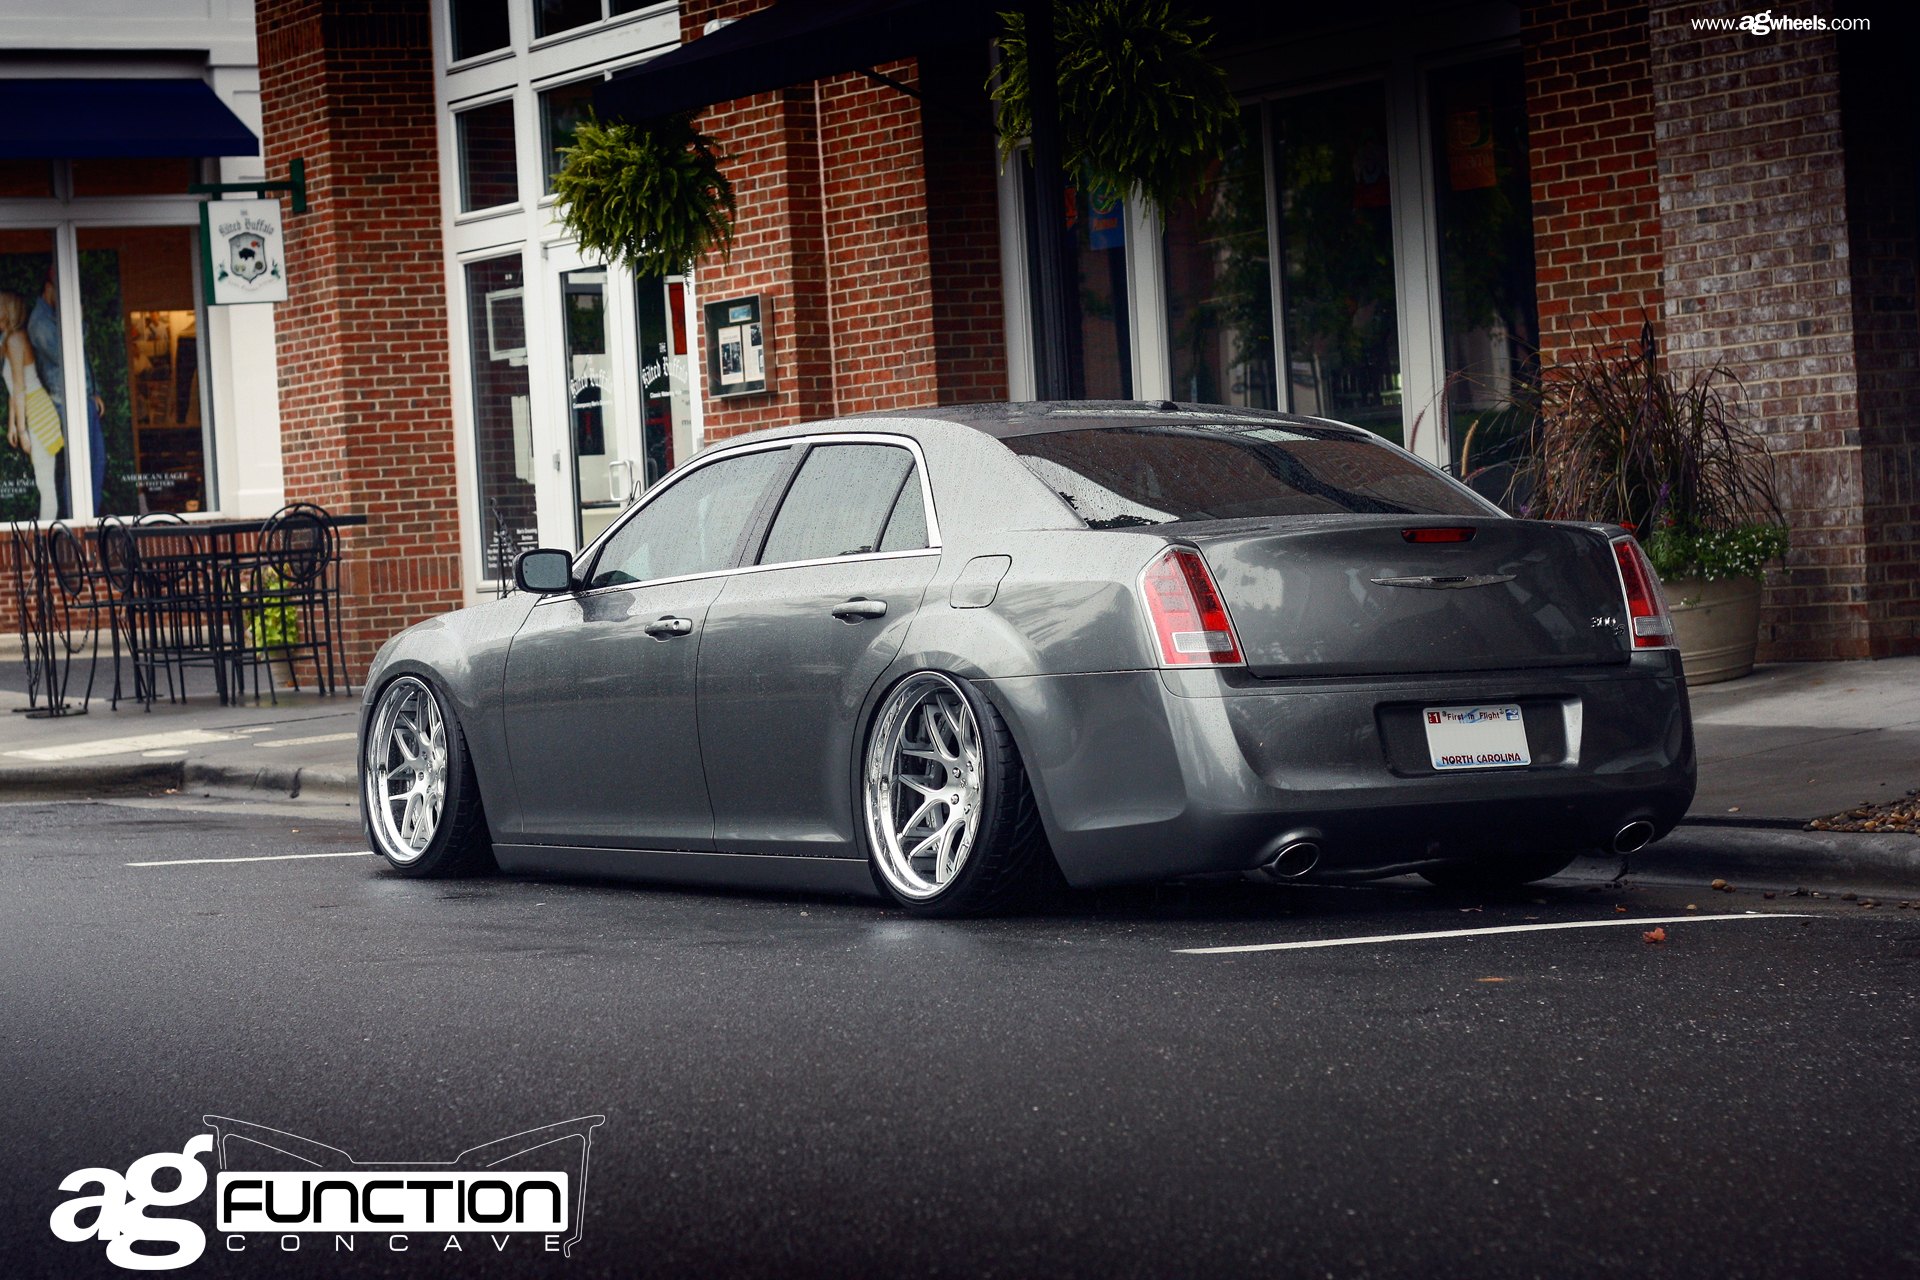 Red LED Taillights on Gray Stanced Chrysler 300 - Photo by Avant Garde Wheels